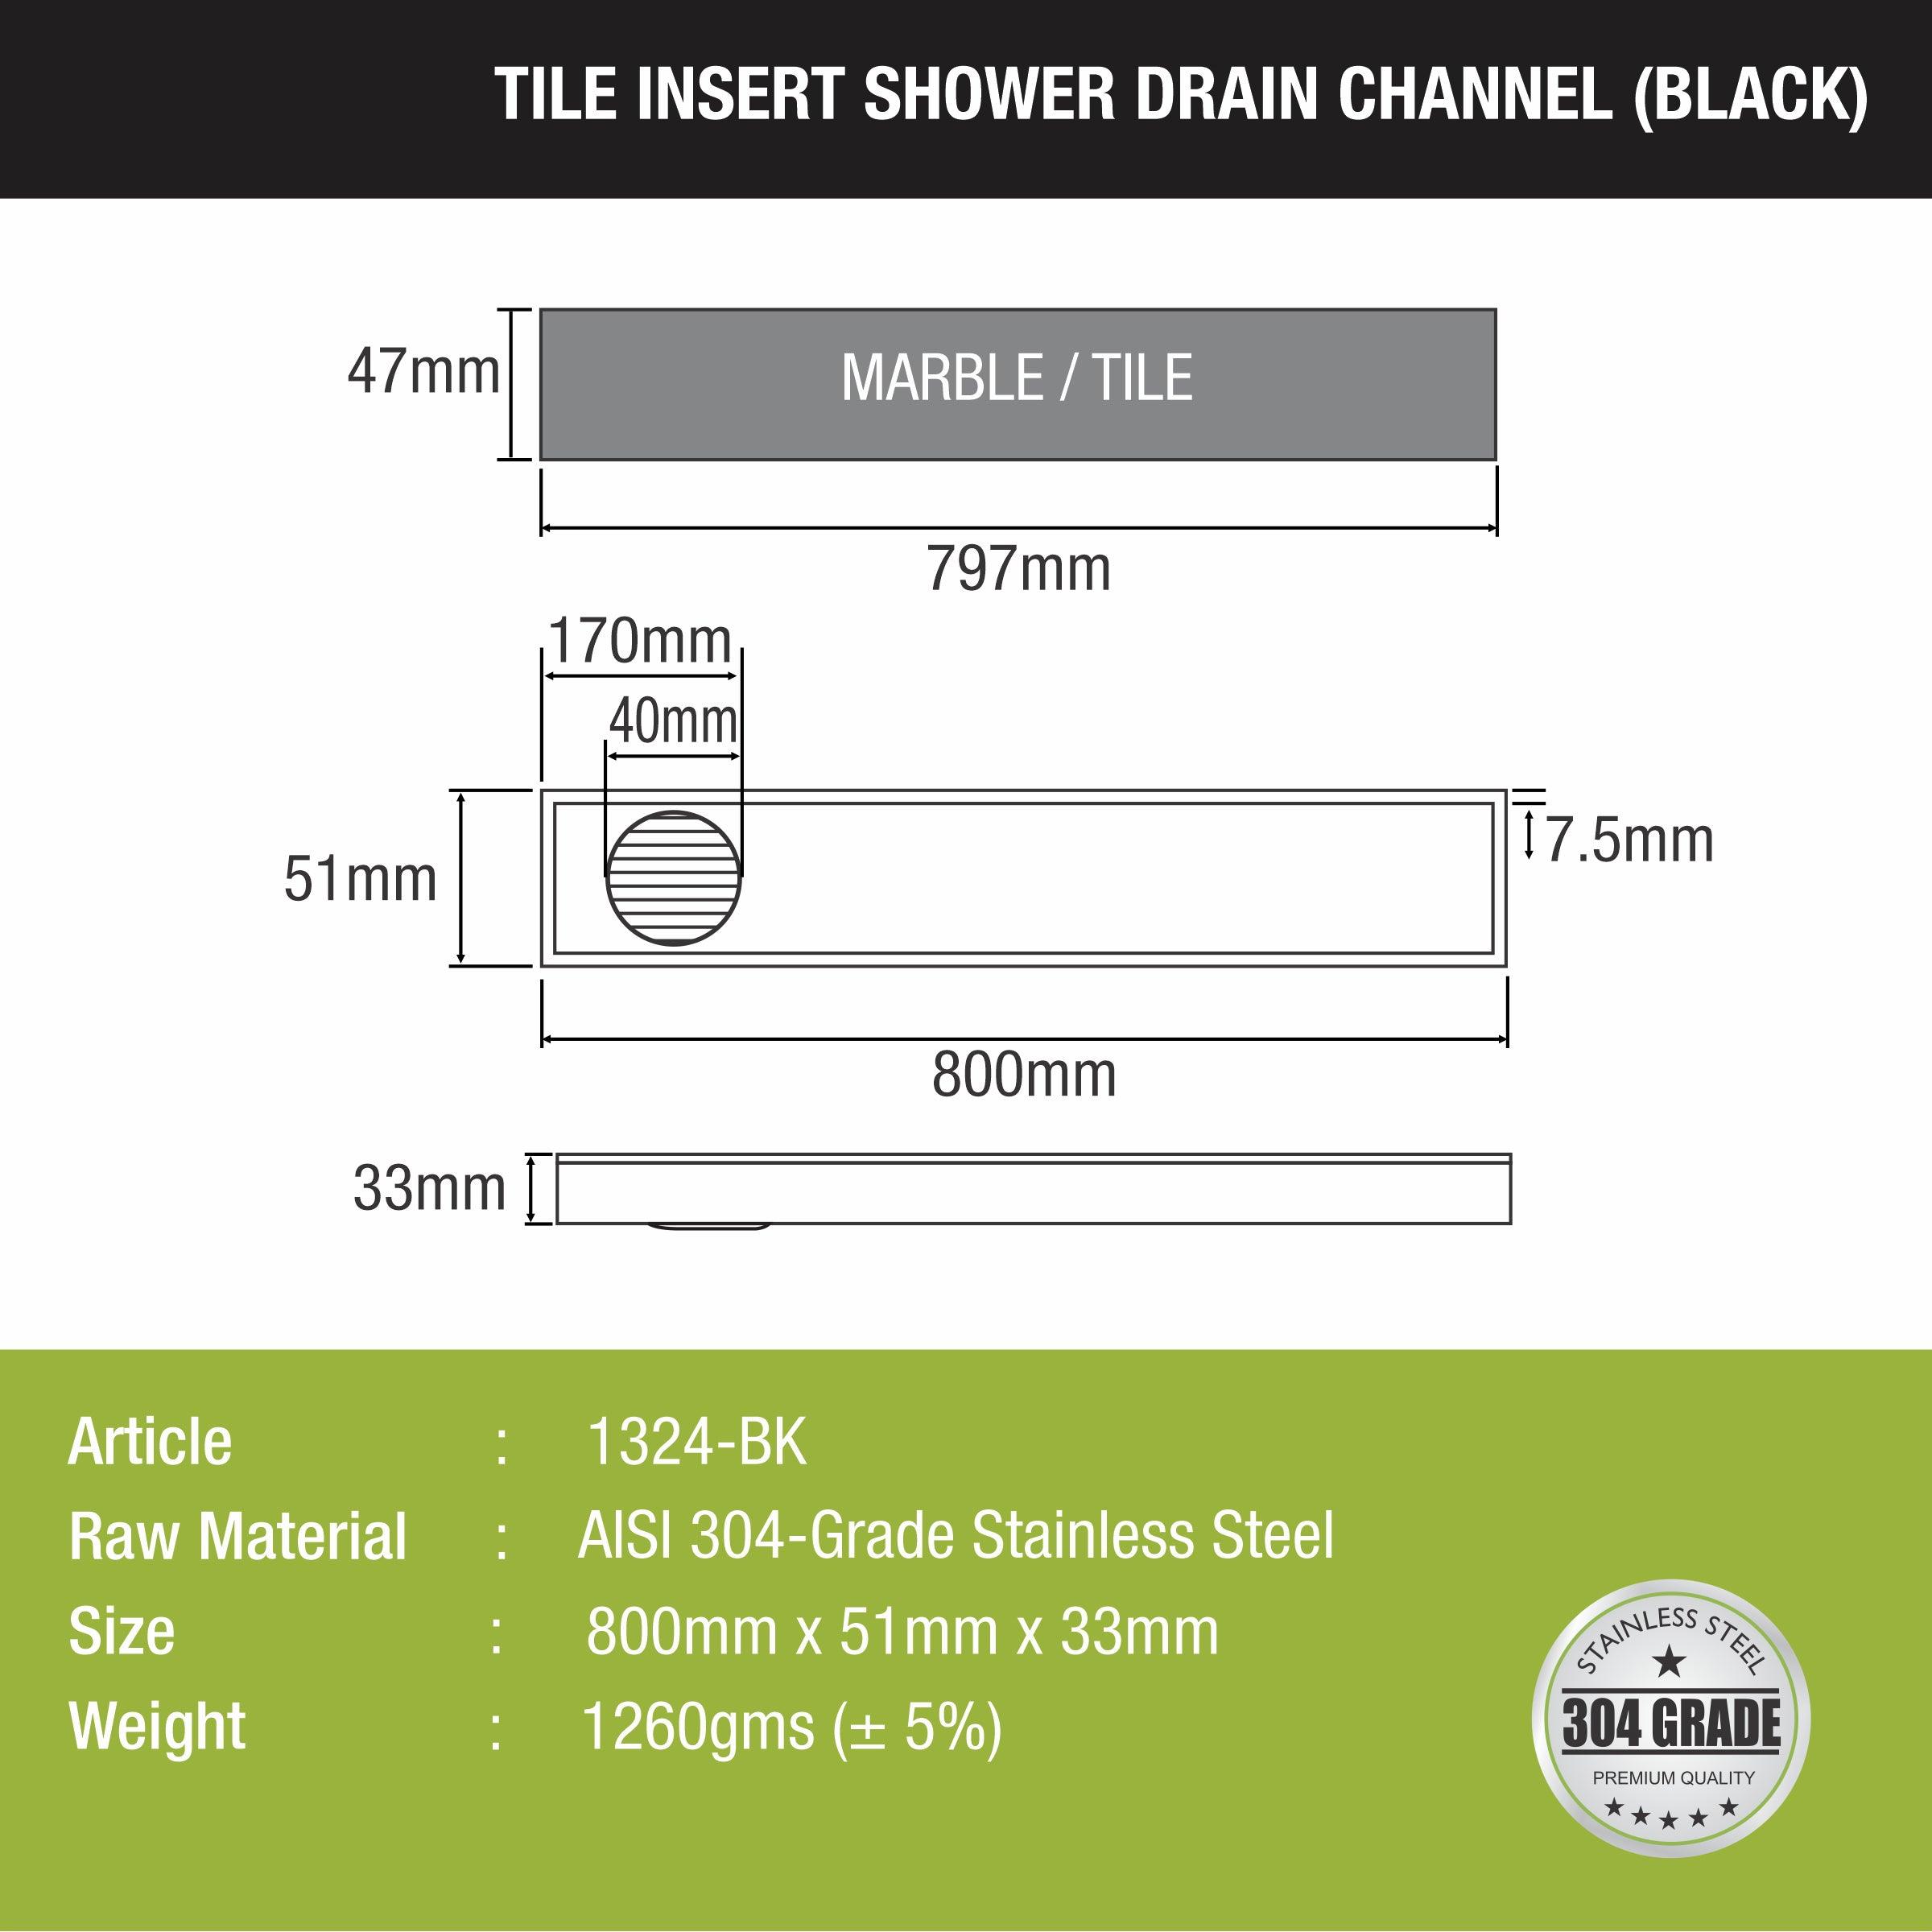 Tile Insert Shower Drain Channel - Black (32 x 2 Inches) size and measurement